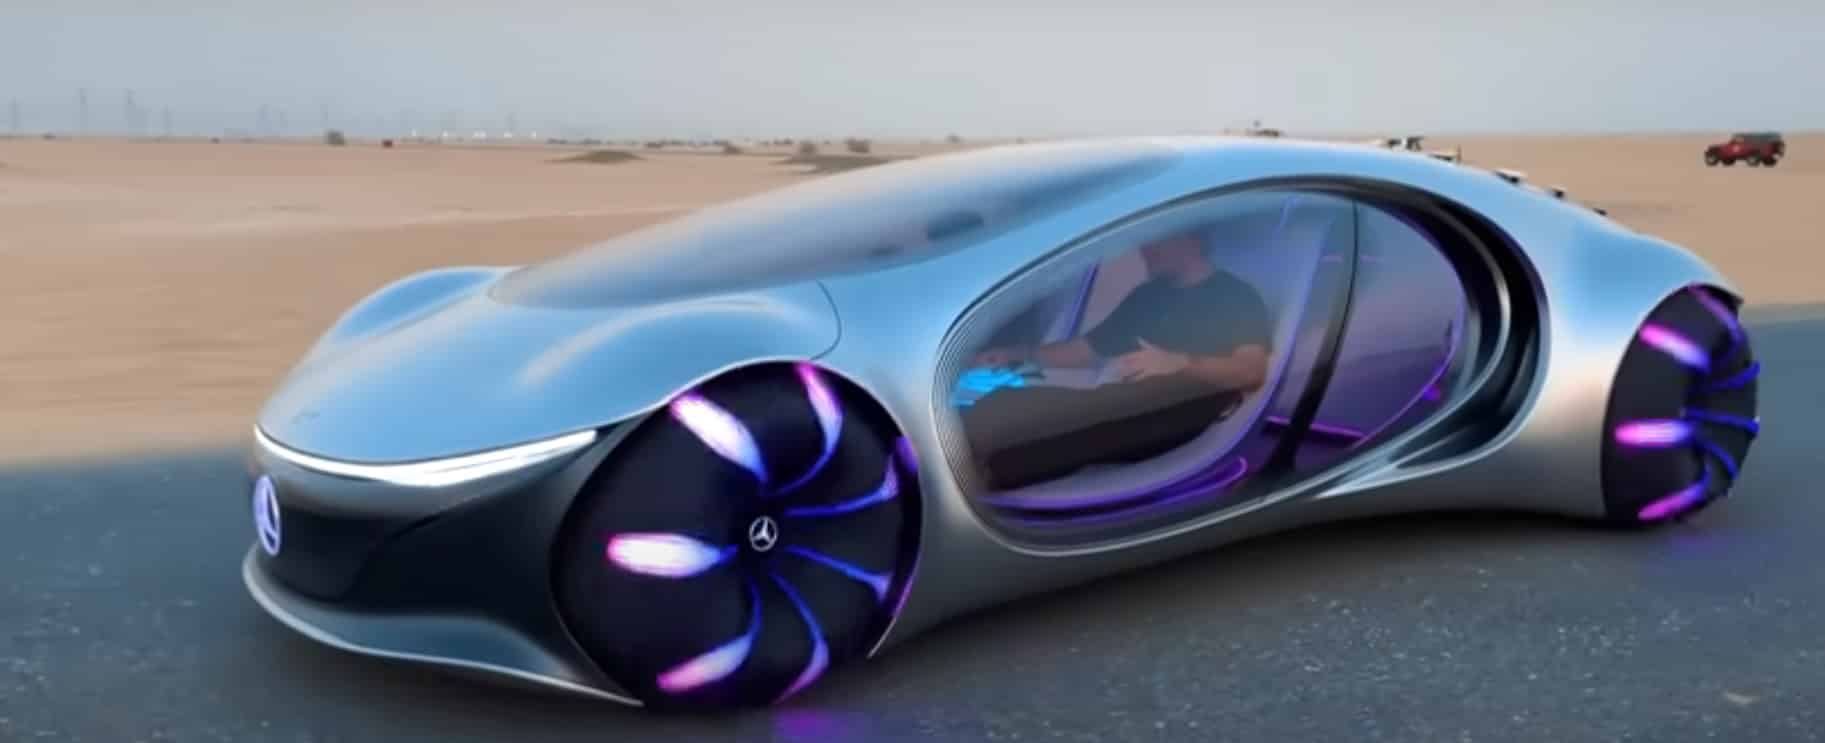 Mercedes AVTR concept car has the coolest steering of any car ever